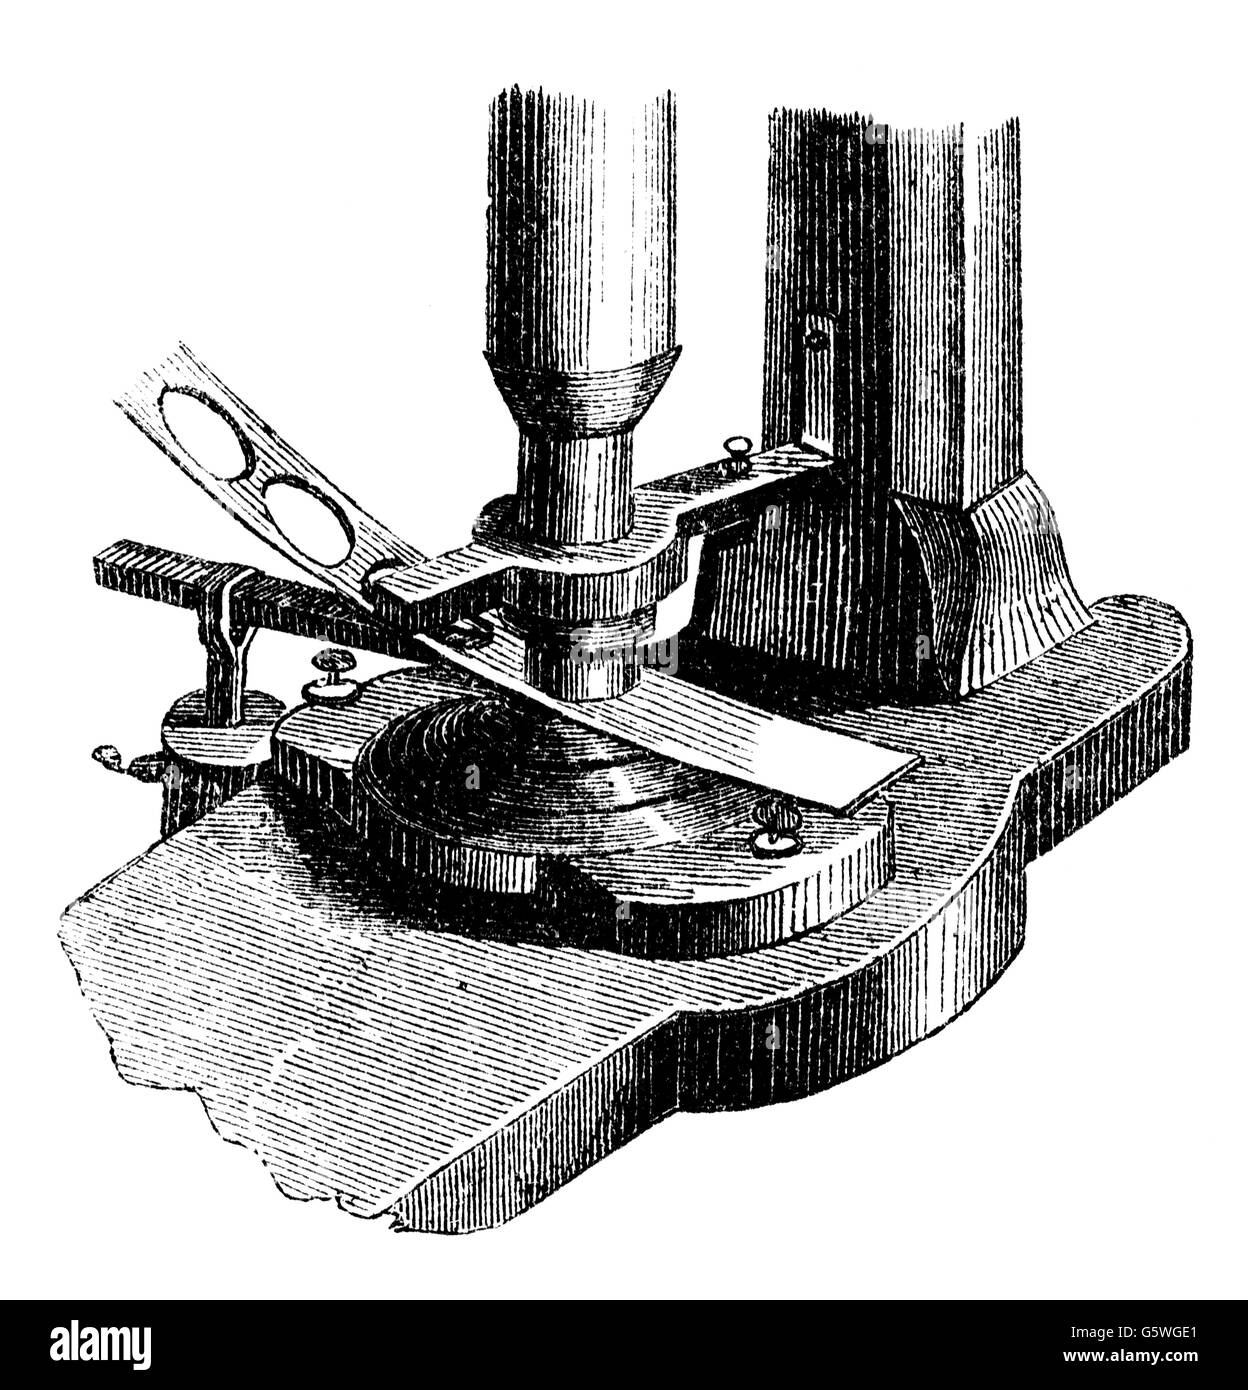 money / finances, mintage, drop press to knock out the coin blanks, from: book of inventions, trades and industries, Otto Spamer publishing house, Leipzig - Berlin, 1864 - 1867, Additional-Rights-Clearences-Not Available Stock Photo